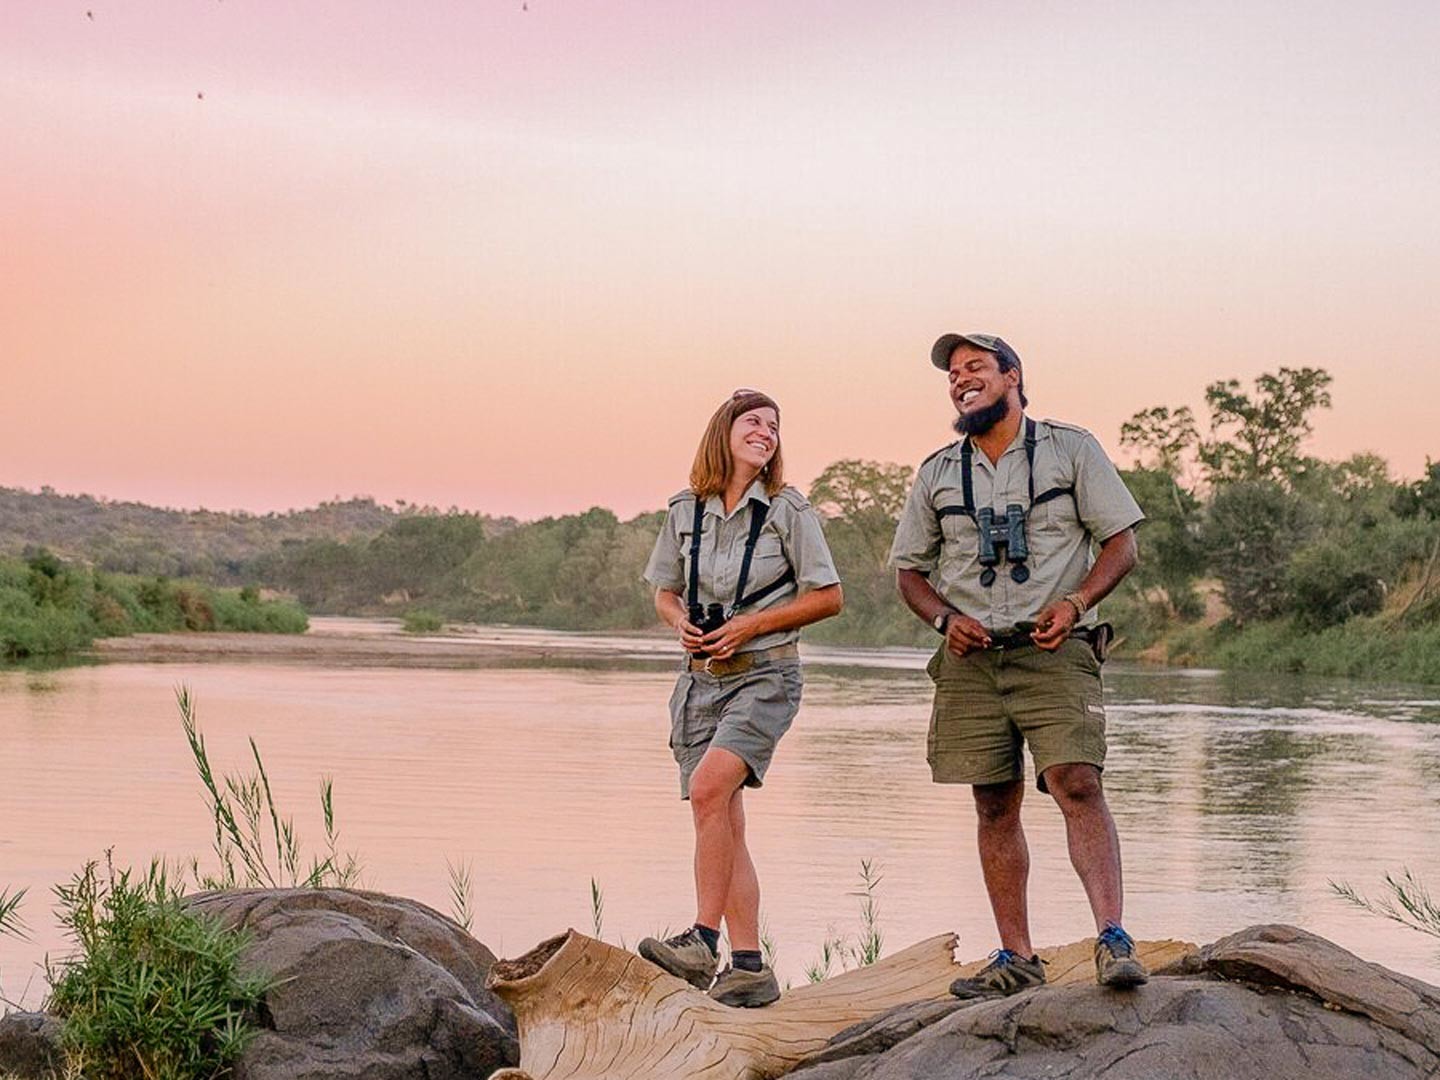 Safari trips in the Kruger National Park in South Africa